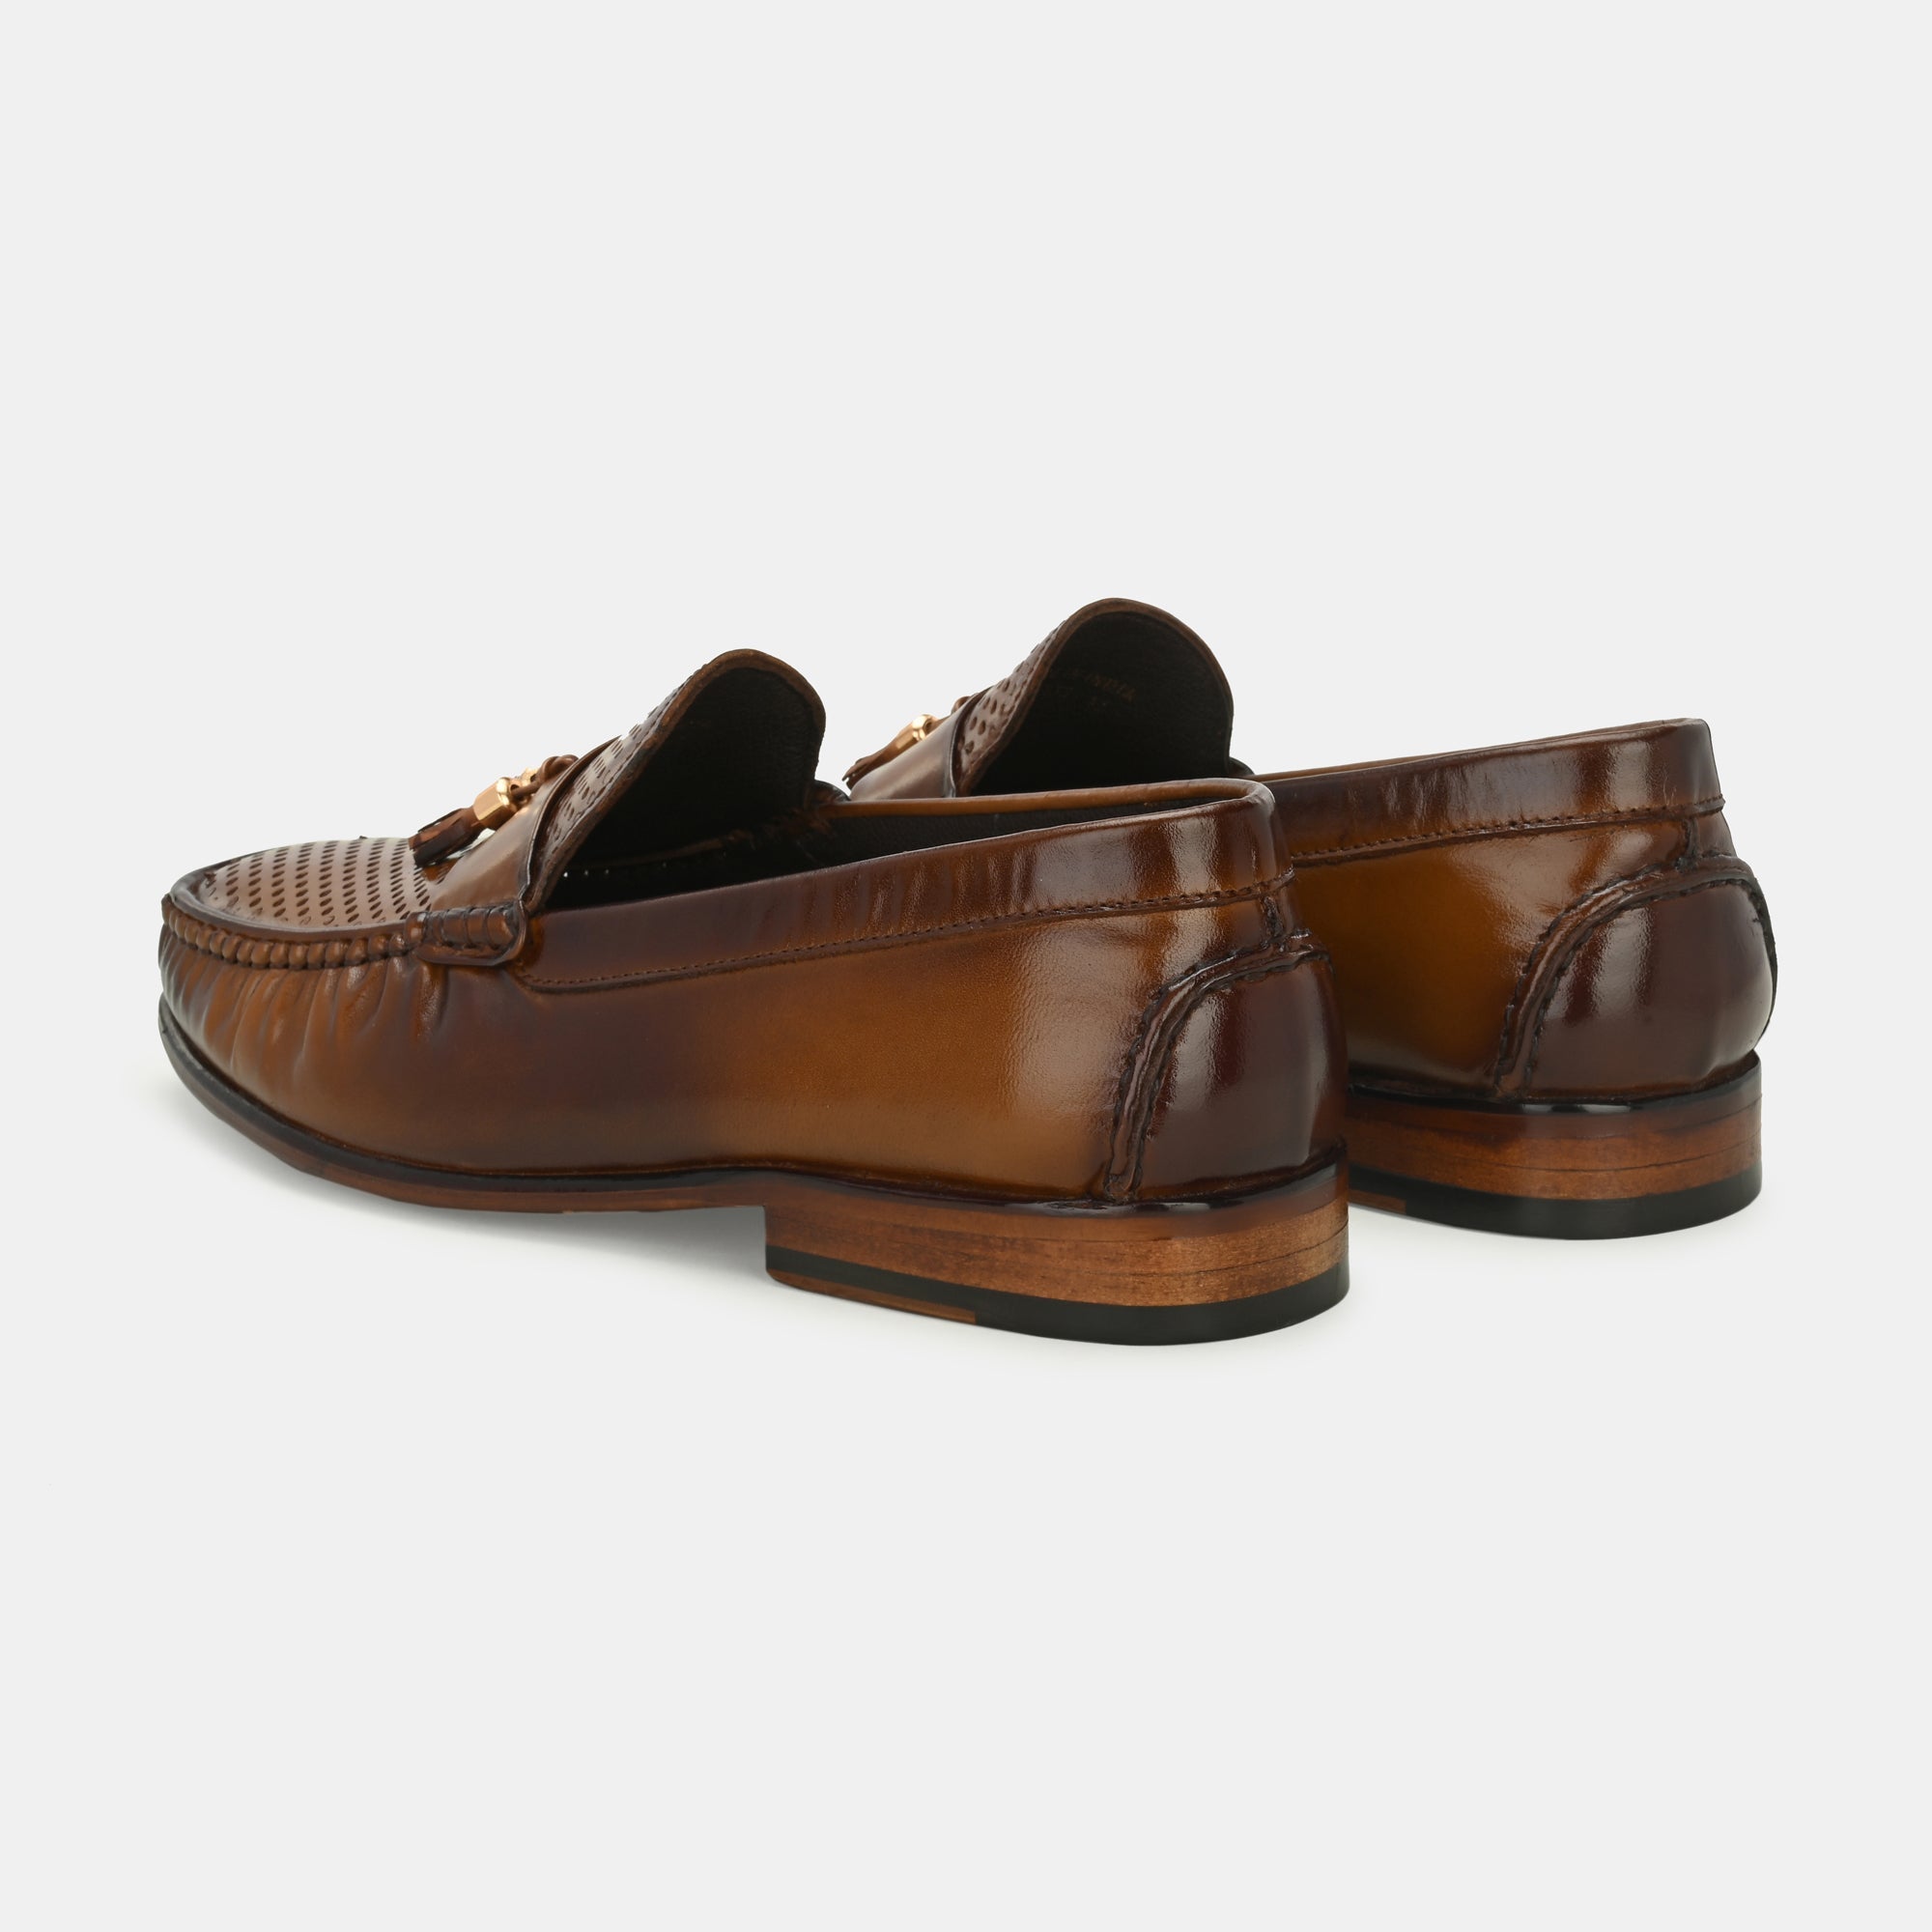 Tan Perforated Tassel Loafers by Lafattio